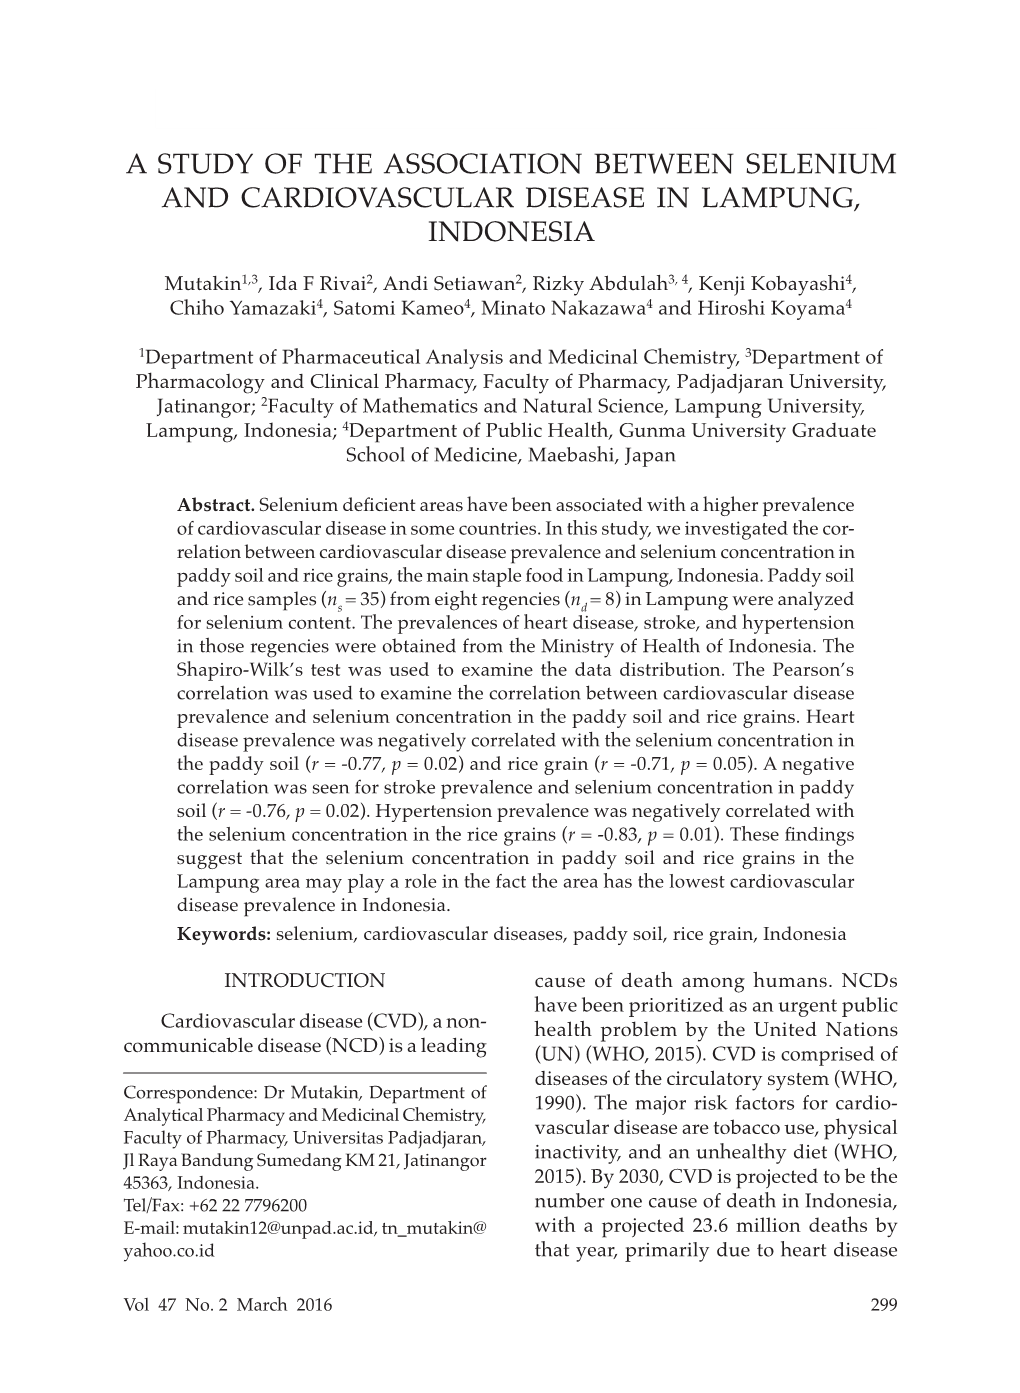 A Study of the Association Between Selenium and Cardiovascular Disease in Lampung, Indonesia